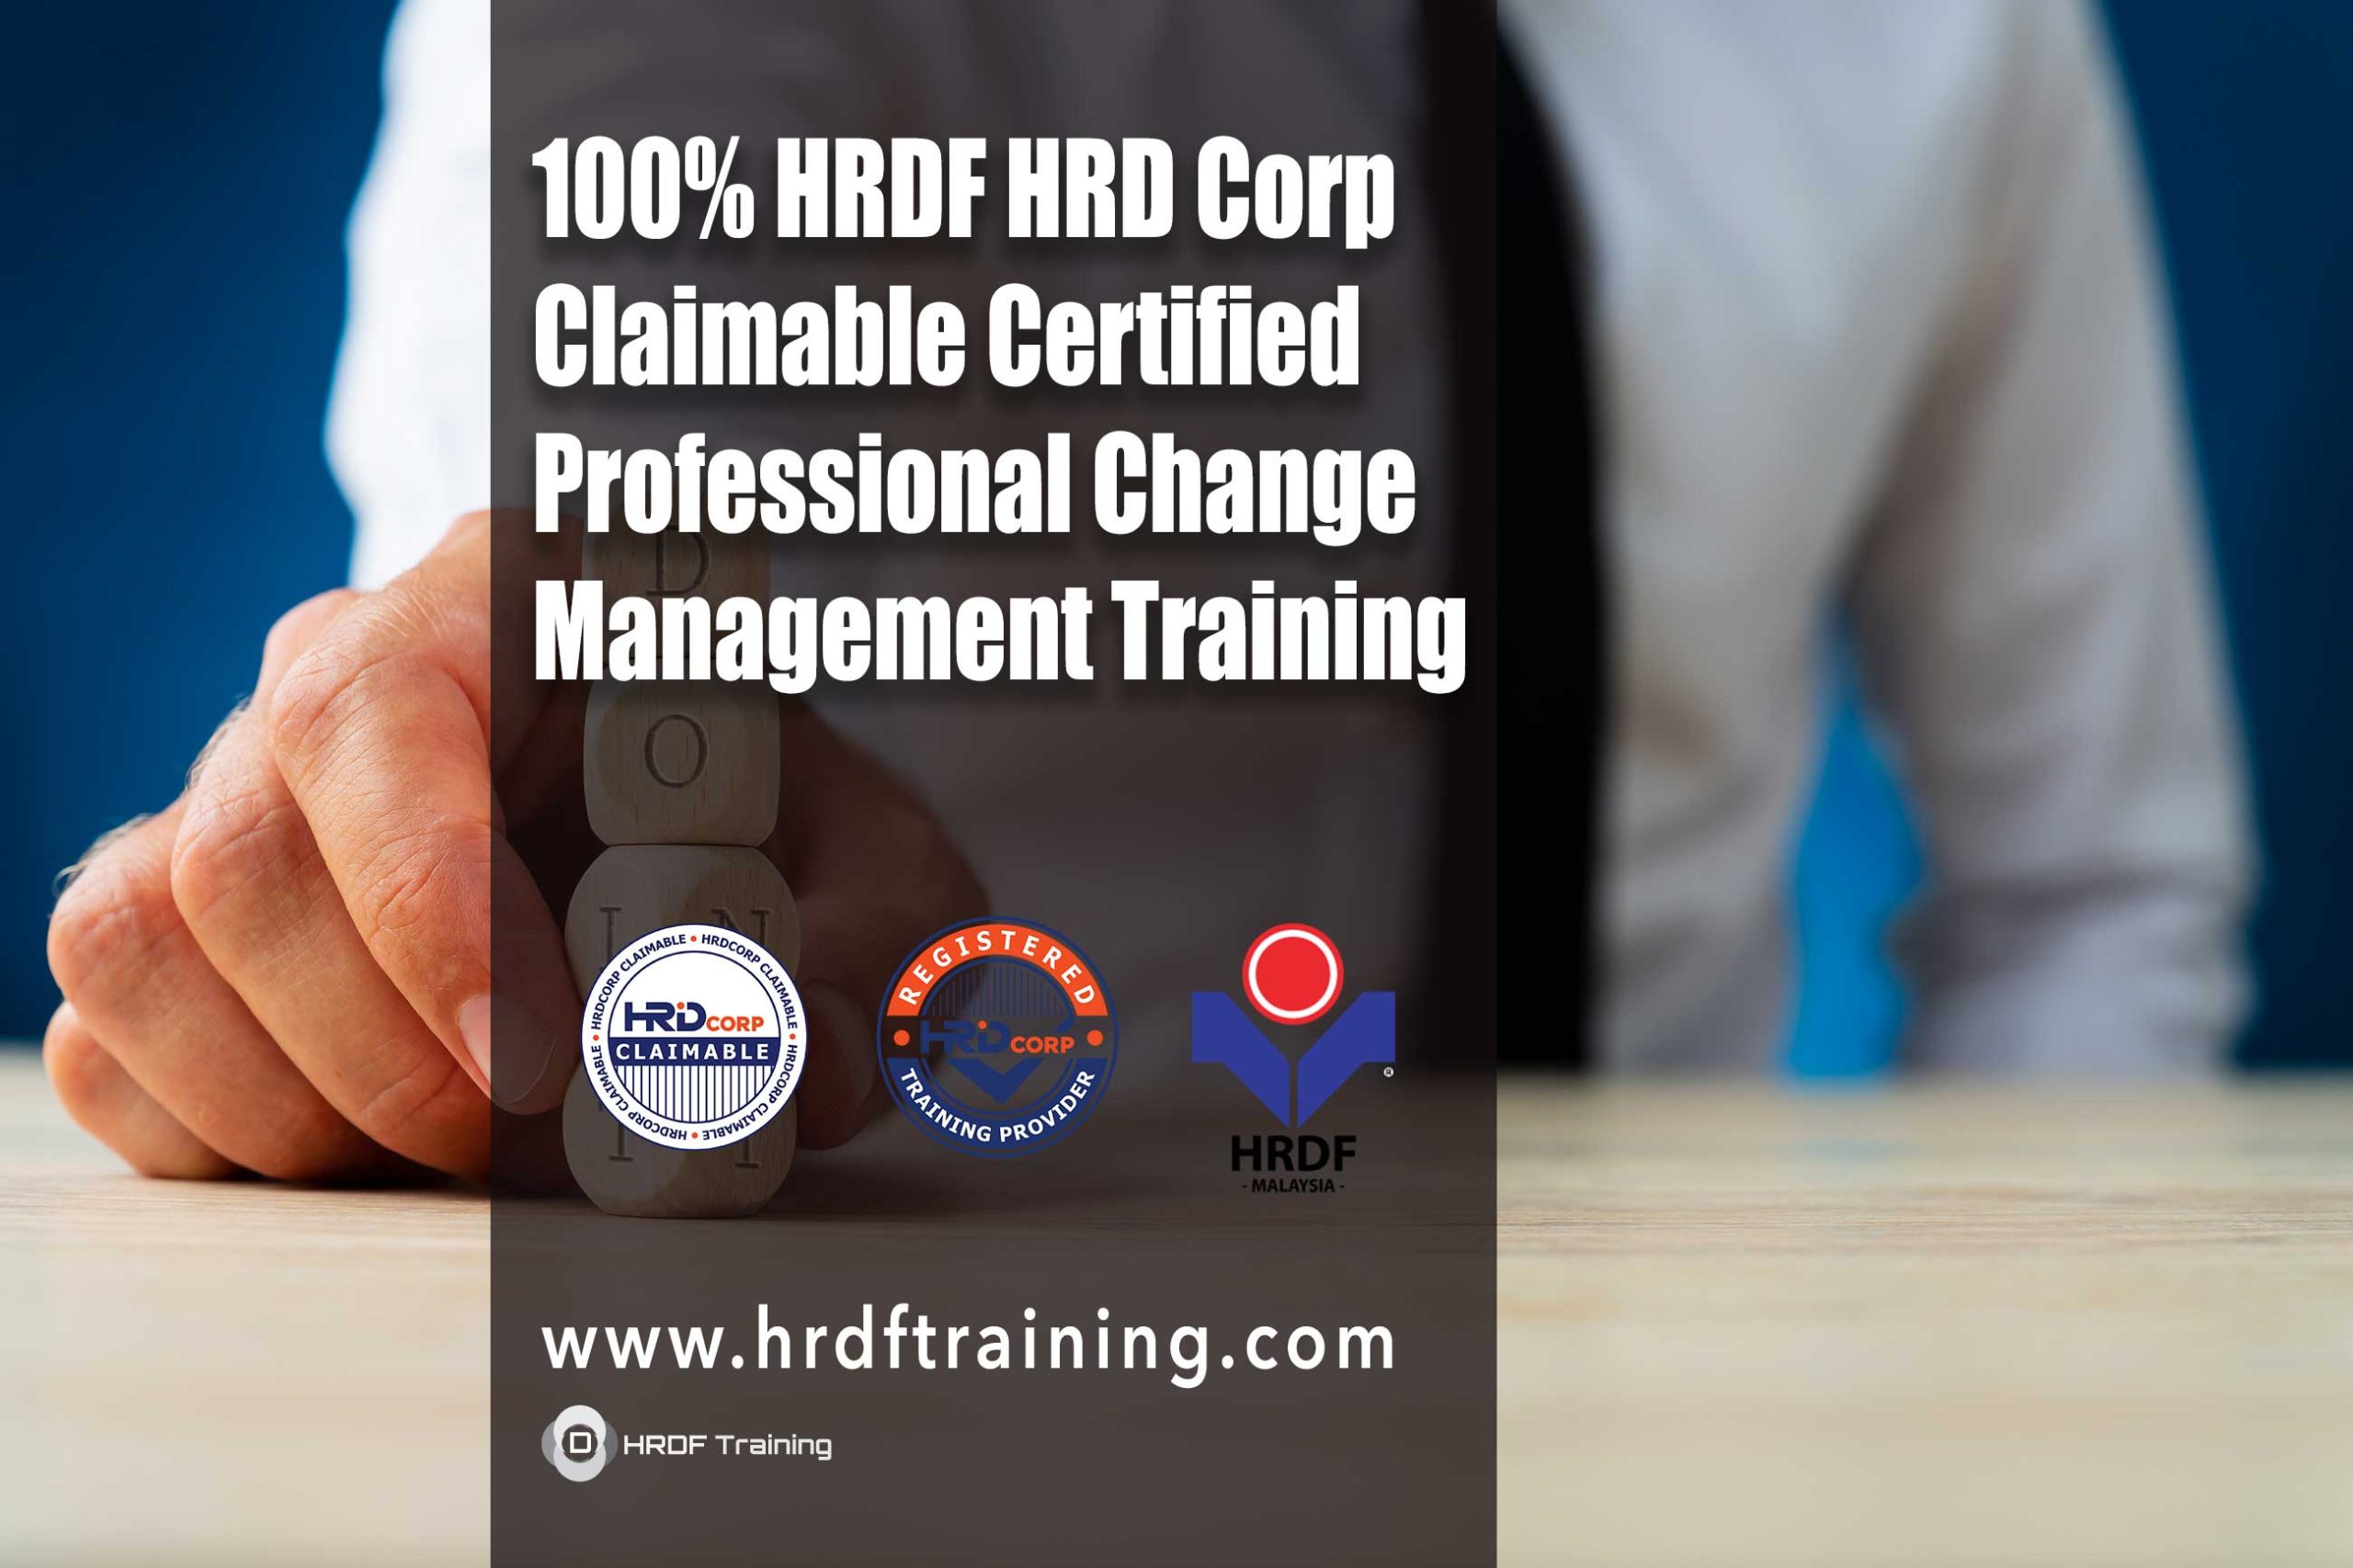 HRDF-HRD-Corp-Claimable-Certified-Professional-Change-Management-Training